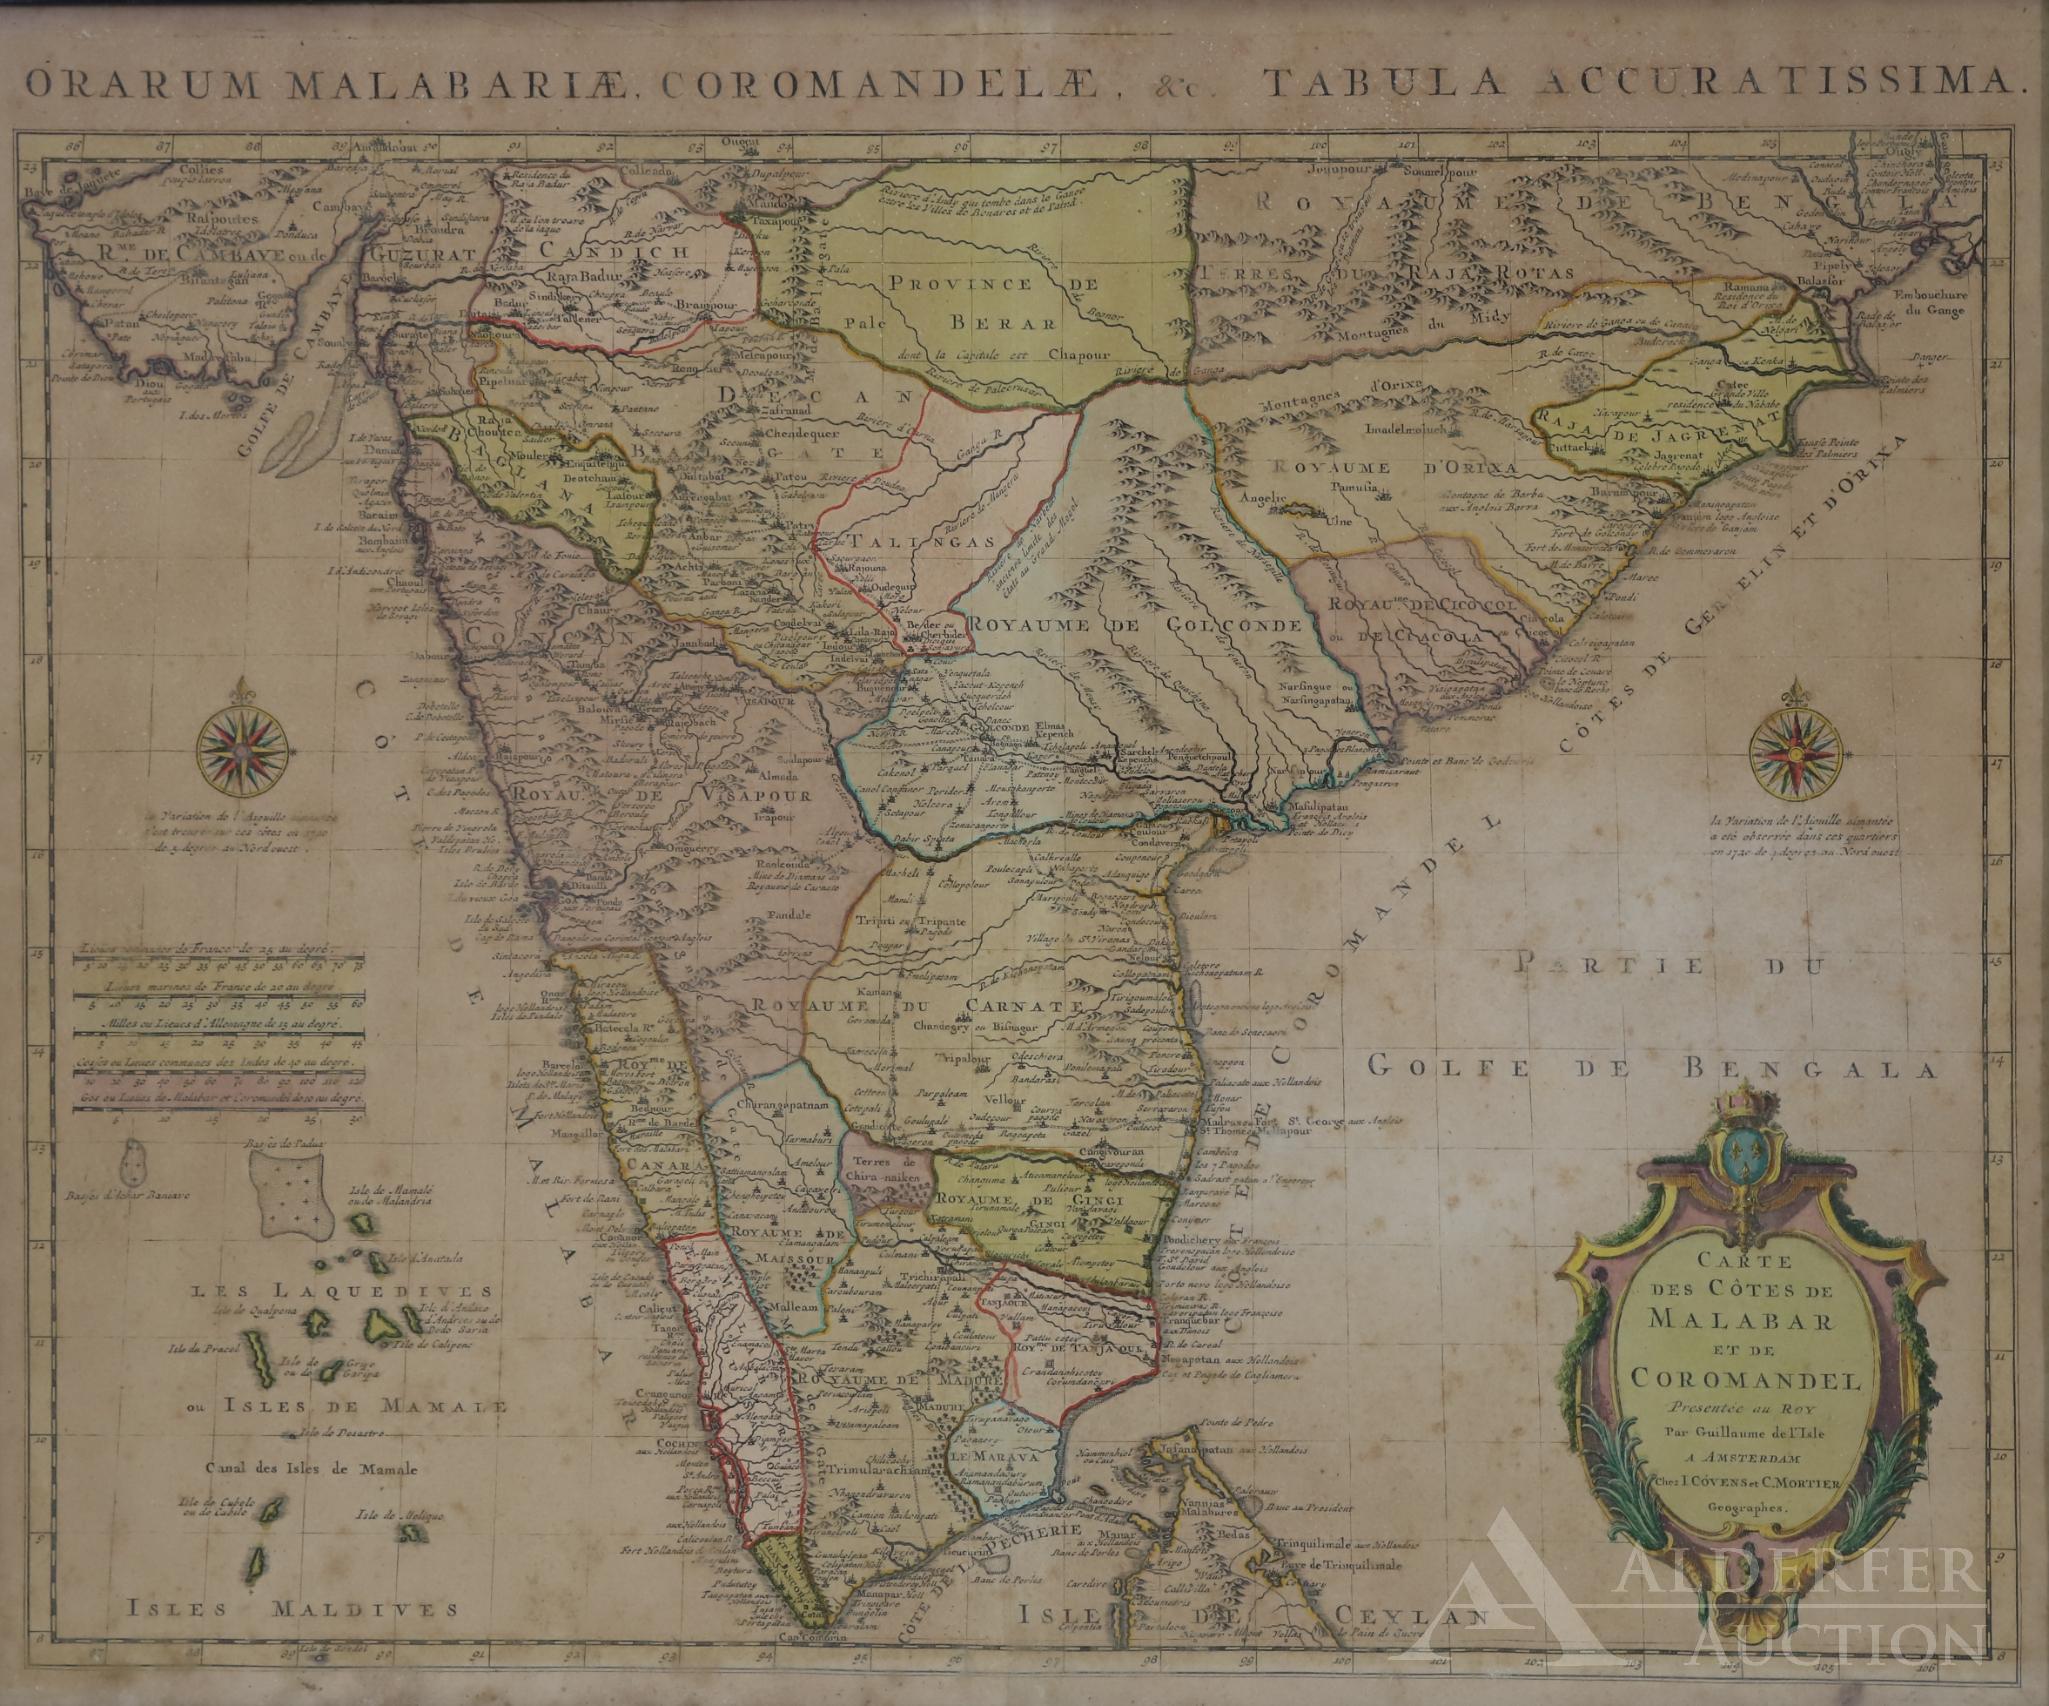 Map of India and Ceylon by Guillaume de Lisle--1742